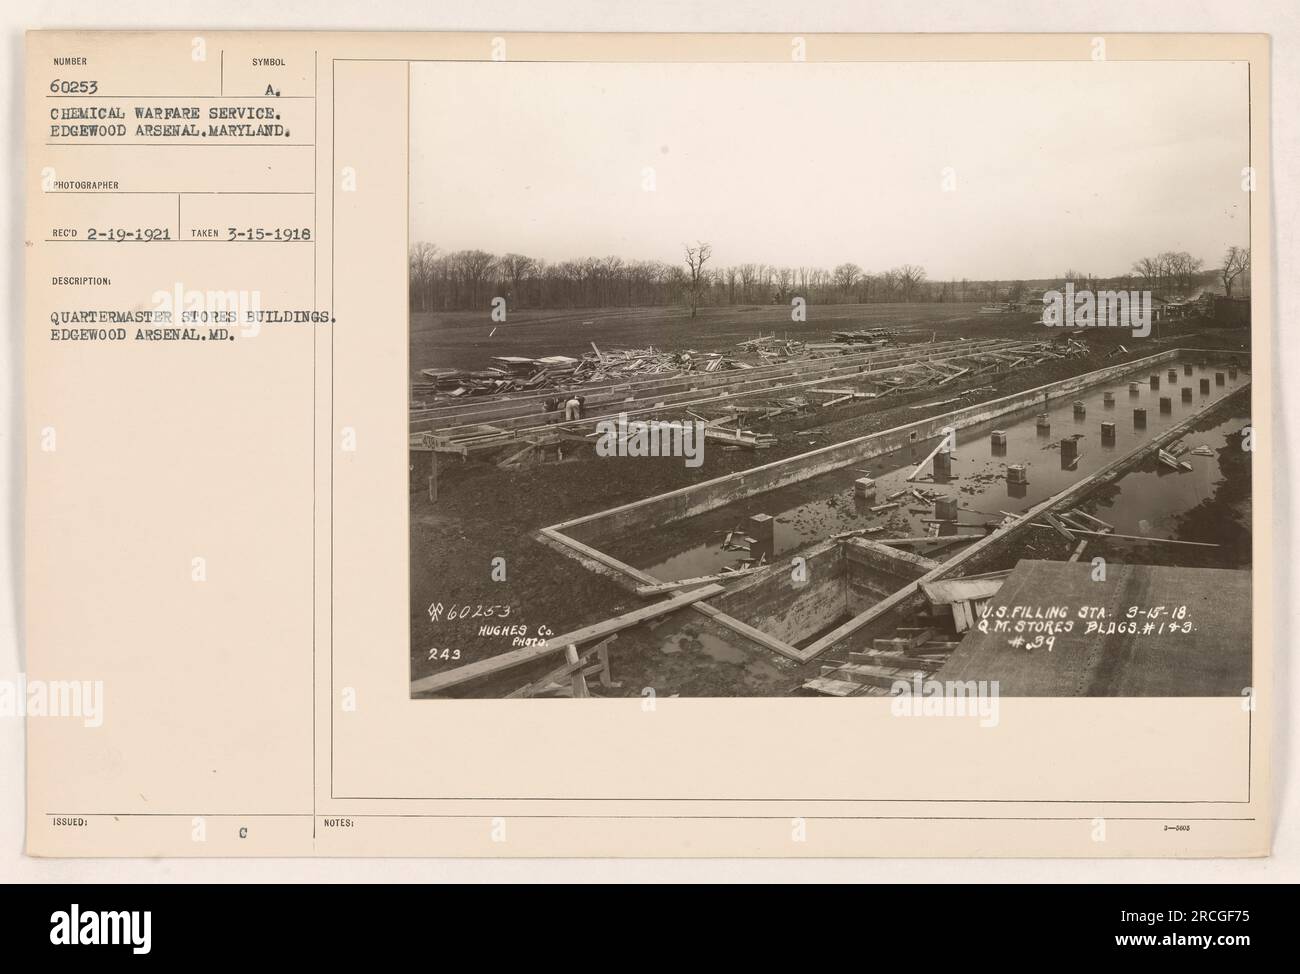 Quartermaster stores buildings at Edgewood Arsenal, MD, were captured in this photograph taken on March 15th, 1918. The image is numbered 60253 and shows buildings utilized by the Chemical Warfare Service. Photographer's symbol: RECO 2-19-1921. Additionally, there are notes mentioning the presence of Hughes Co Prata U.S. Filling Sta. Stock Photo